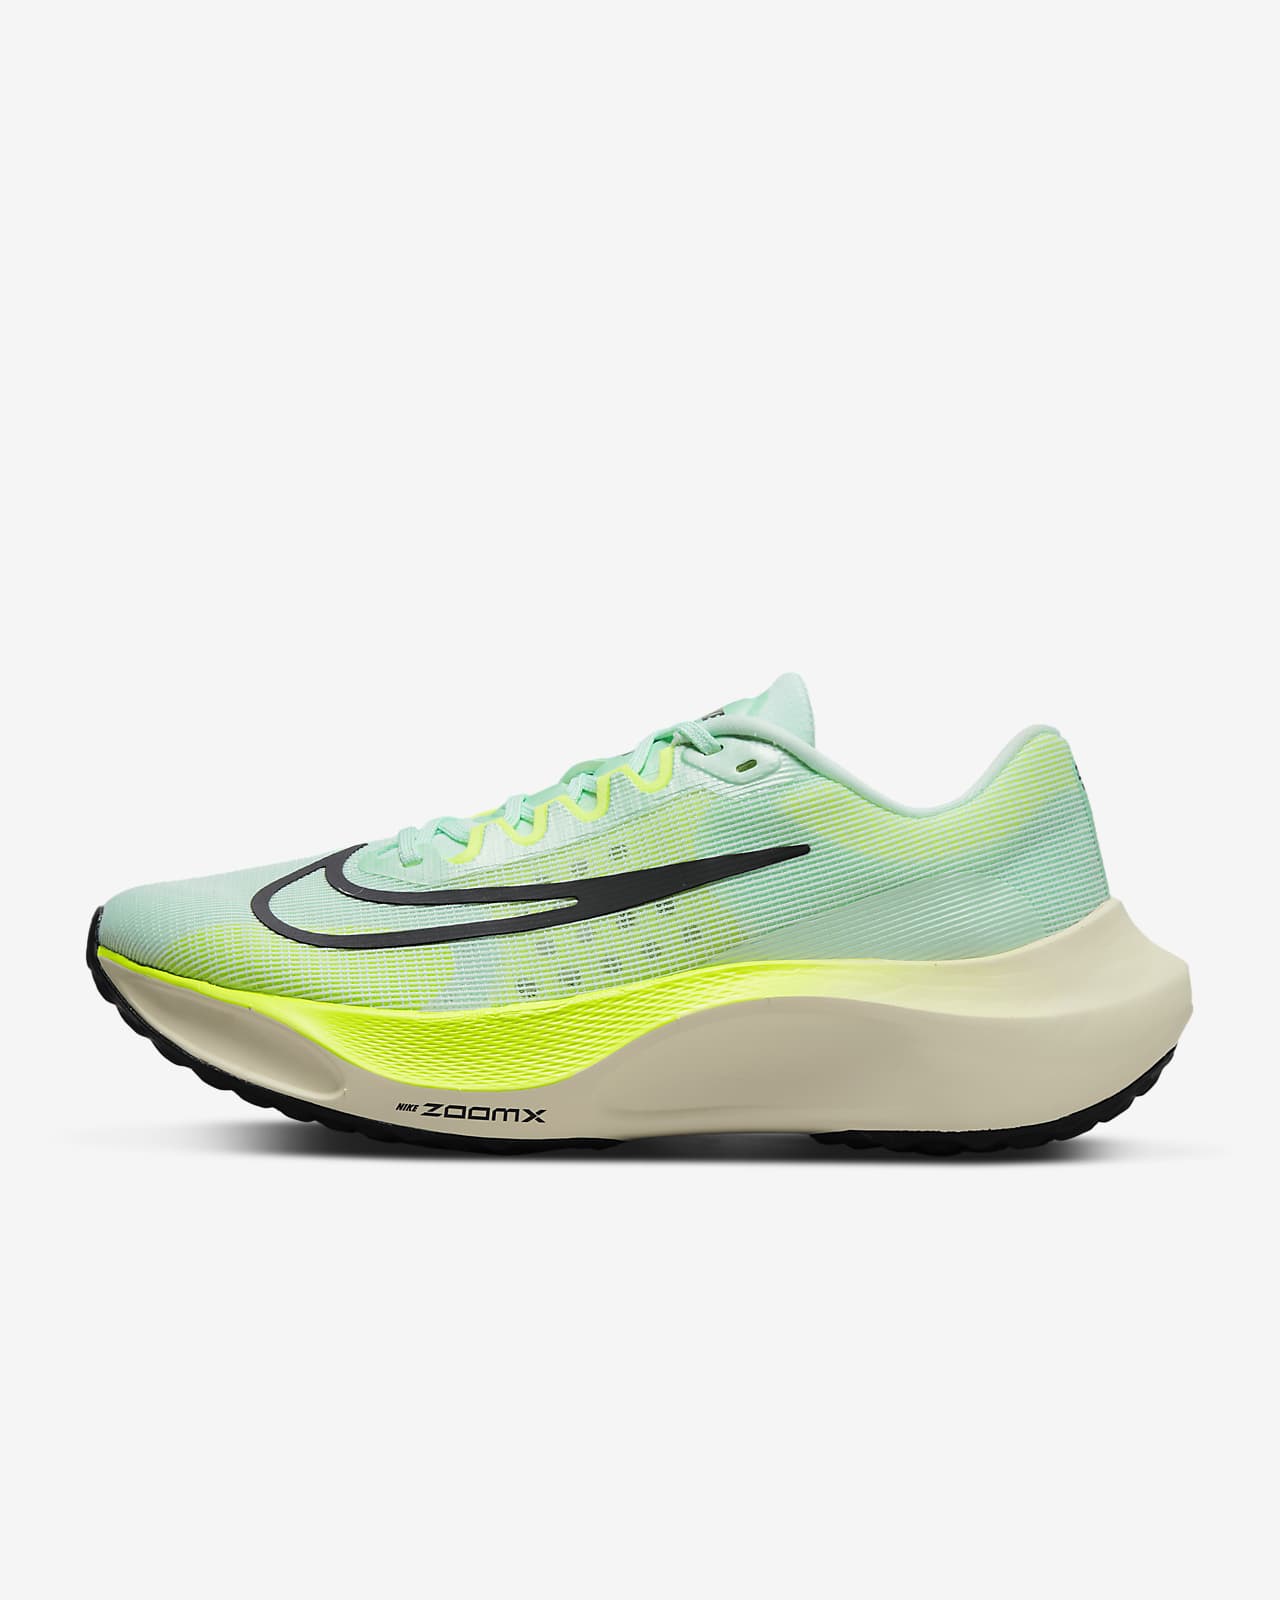 Nike Zoom Fly 5 Men's Road Running Shoes. Nike.com